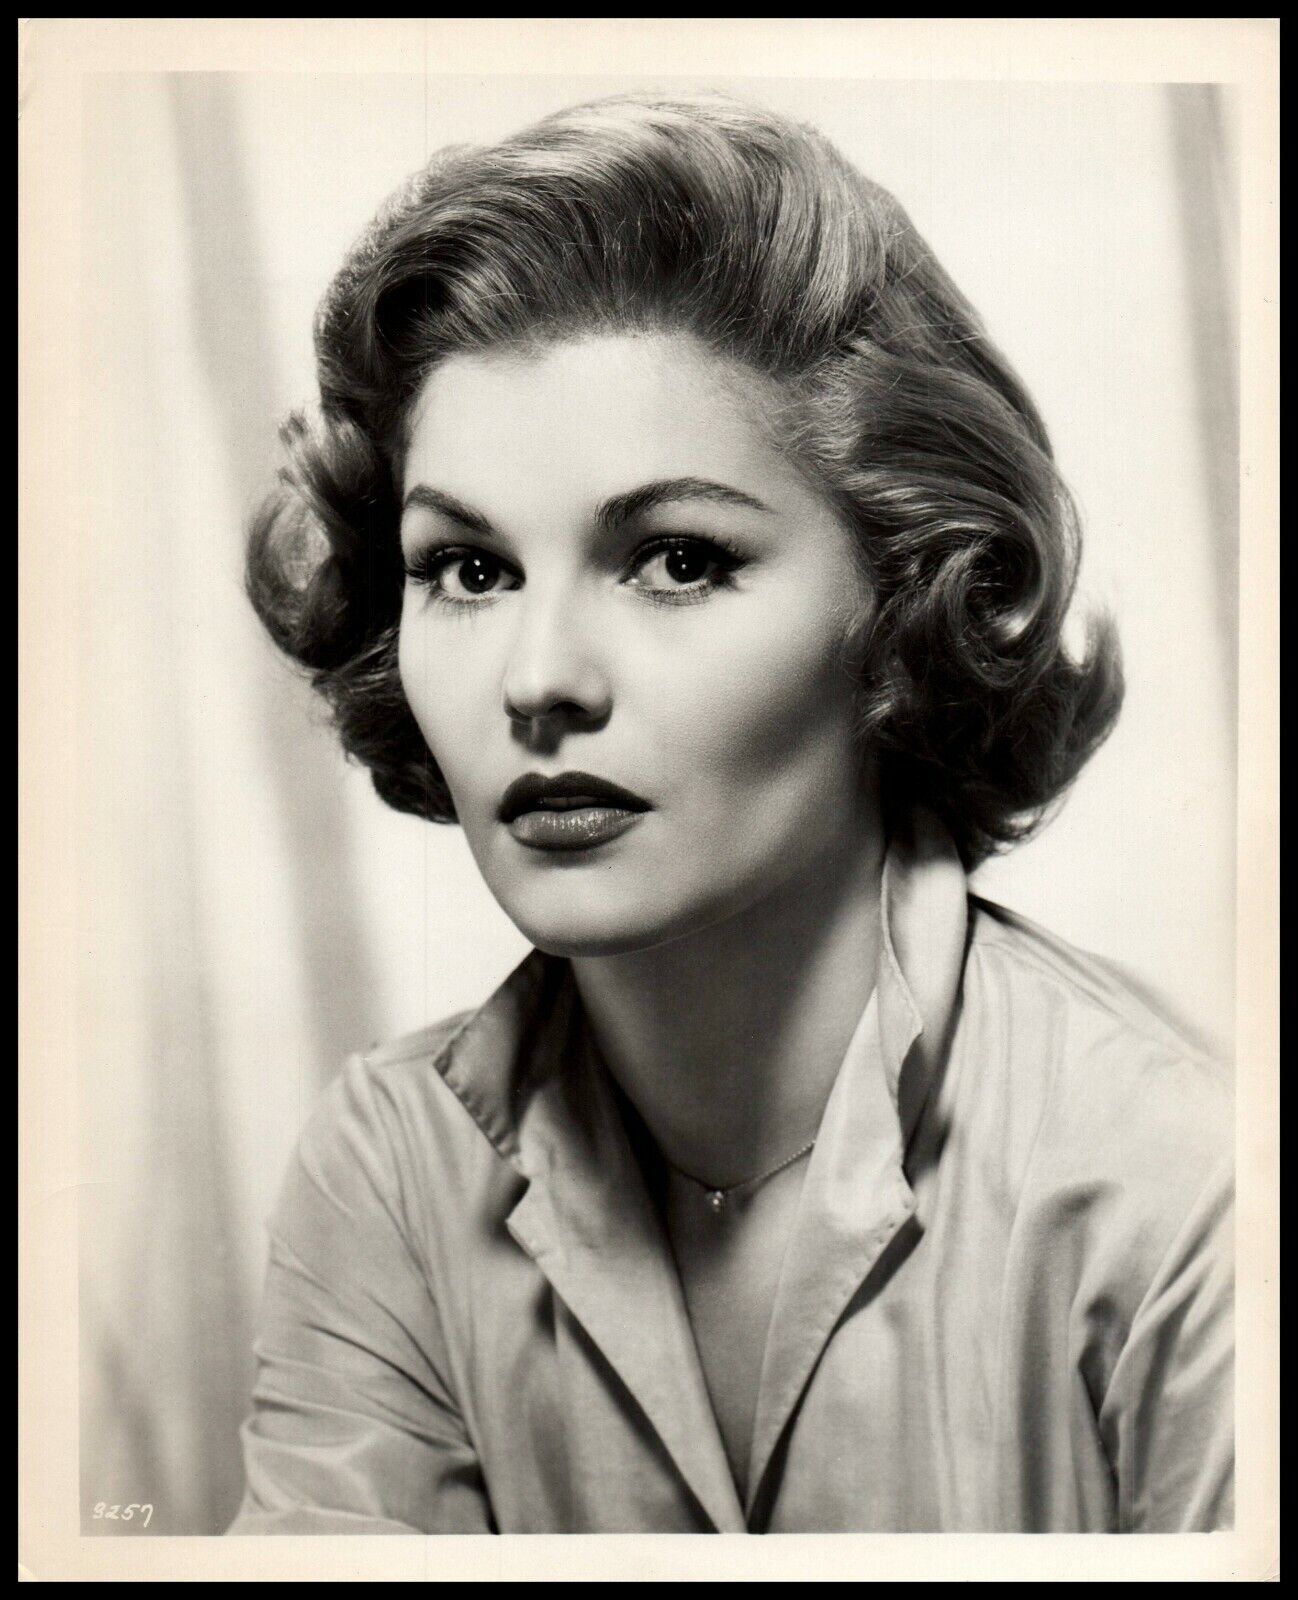 CLAIRE KELLY SOPHISTICATED BEAUTY 1950s MGM STYLISH POSE ORIGINAL PHOTO 427